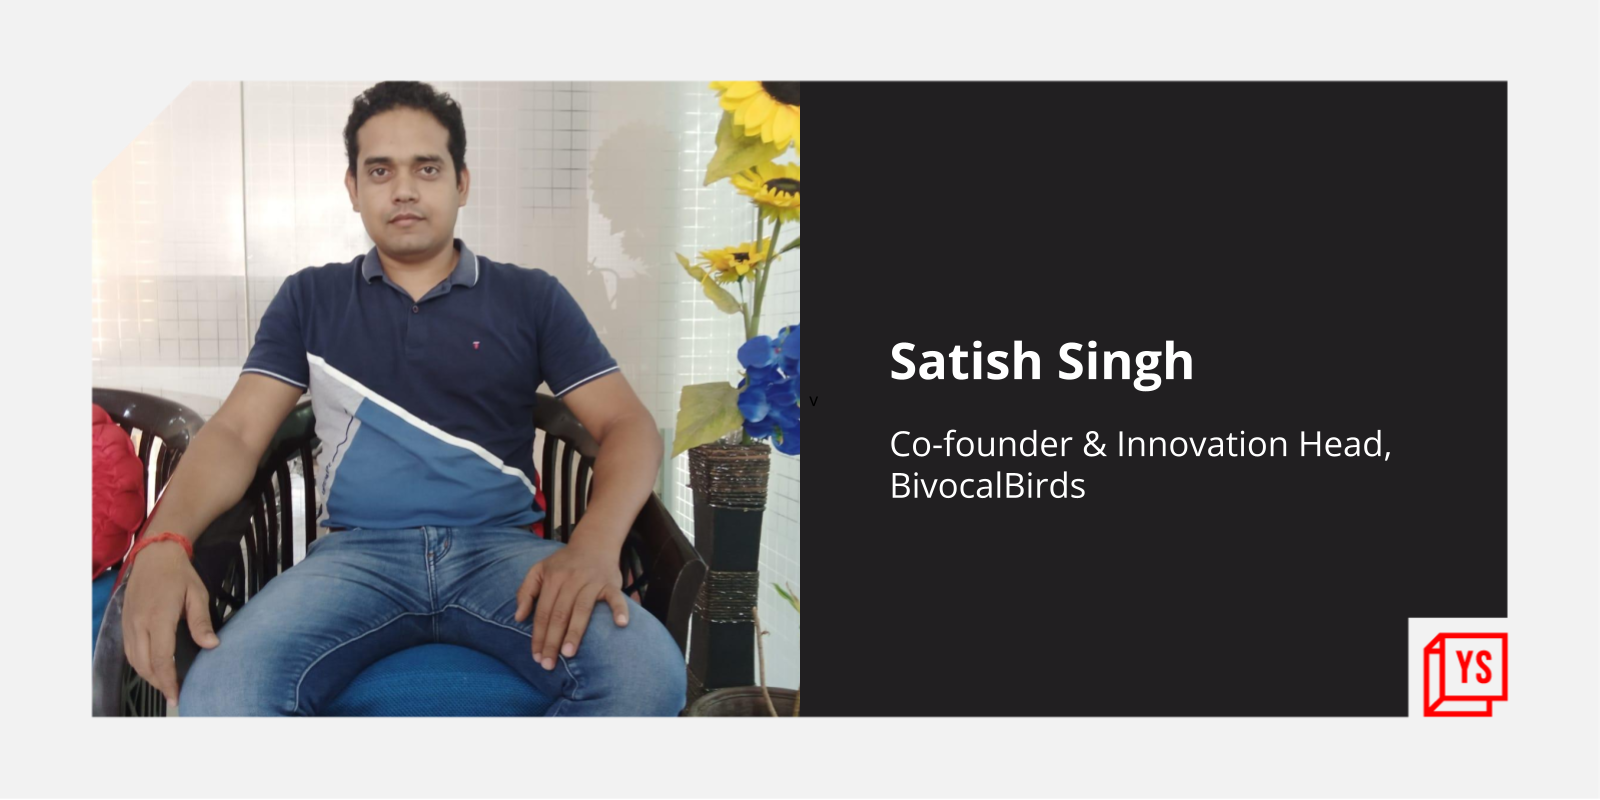 Bootstrapped proptech startup BivocalBirds is helping owners and tenants with end-to-end solutions